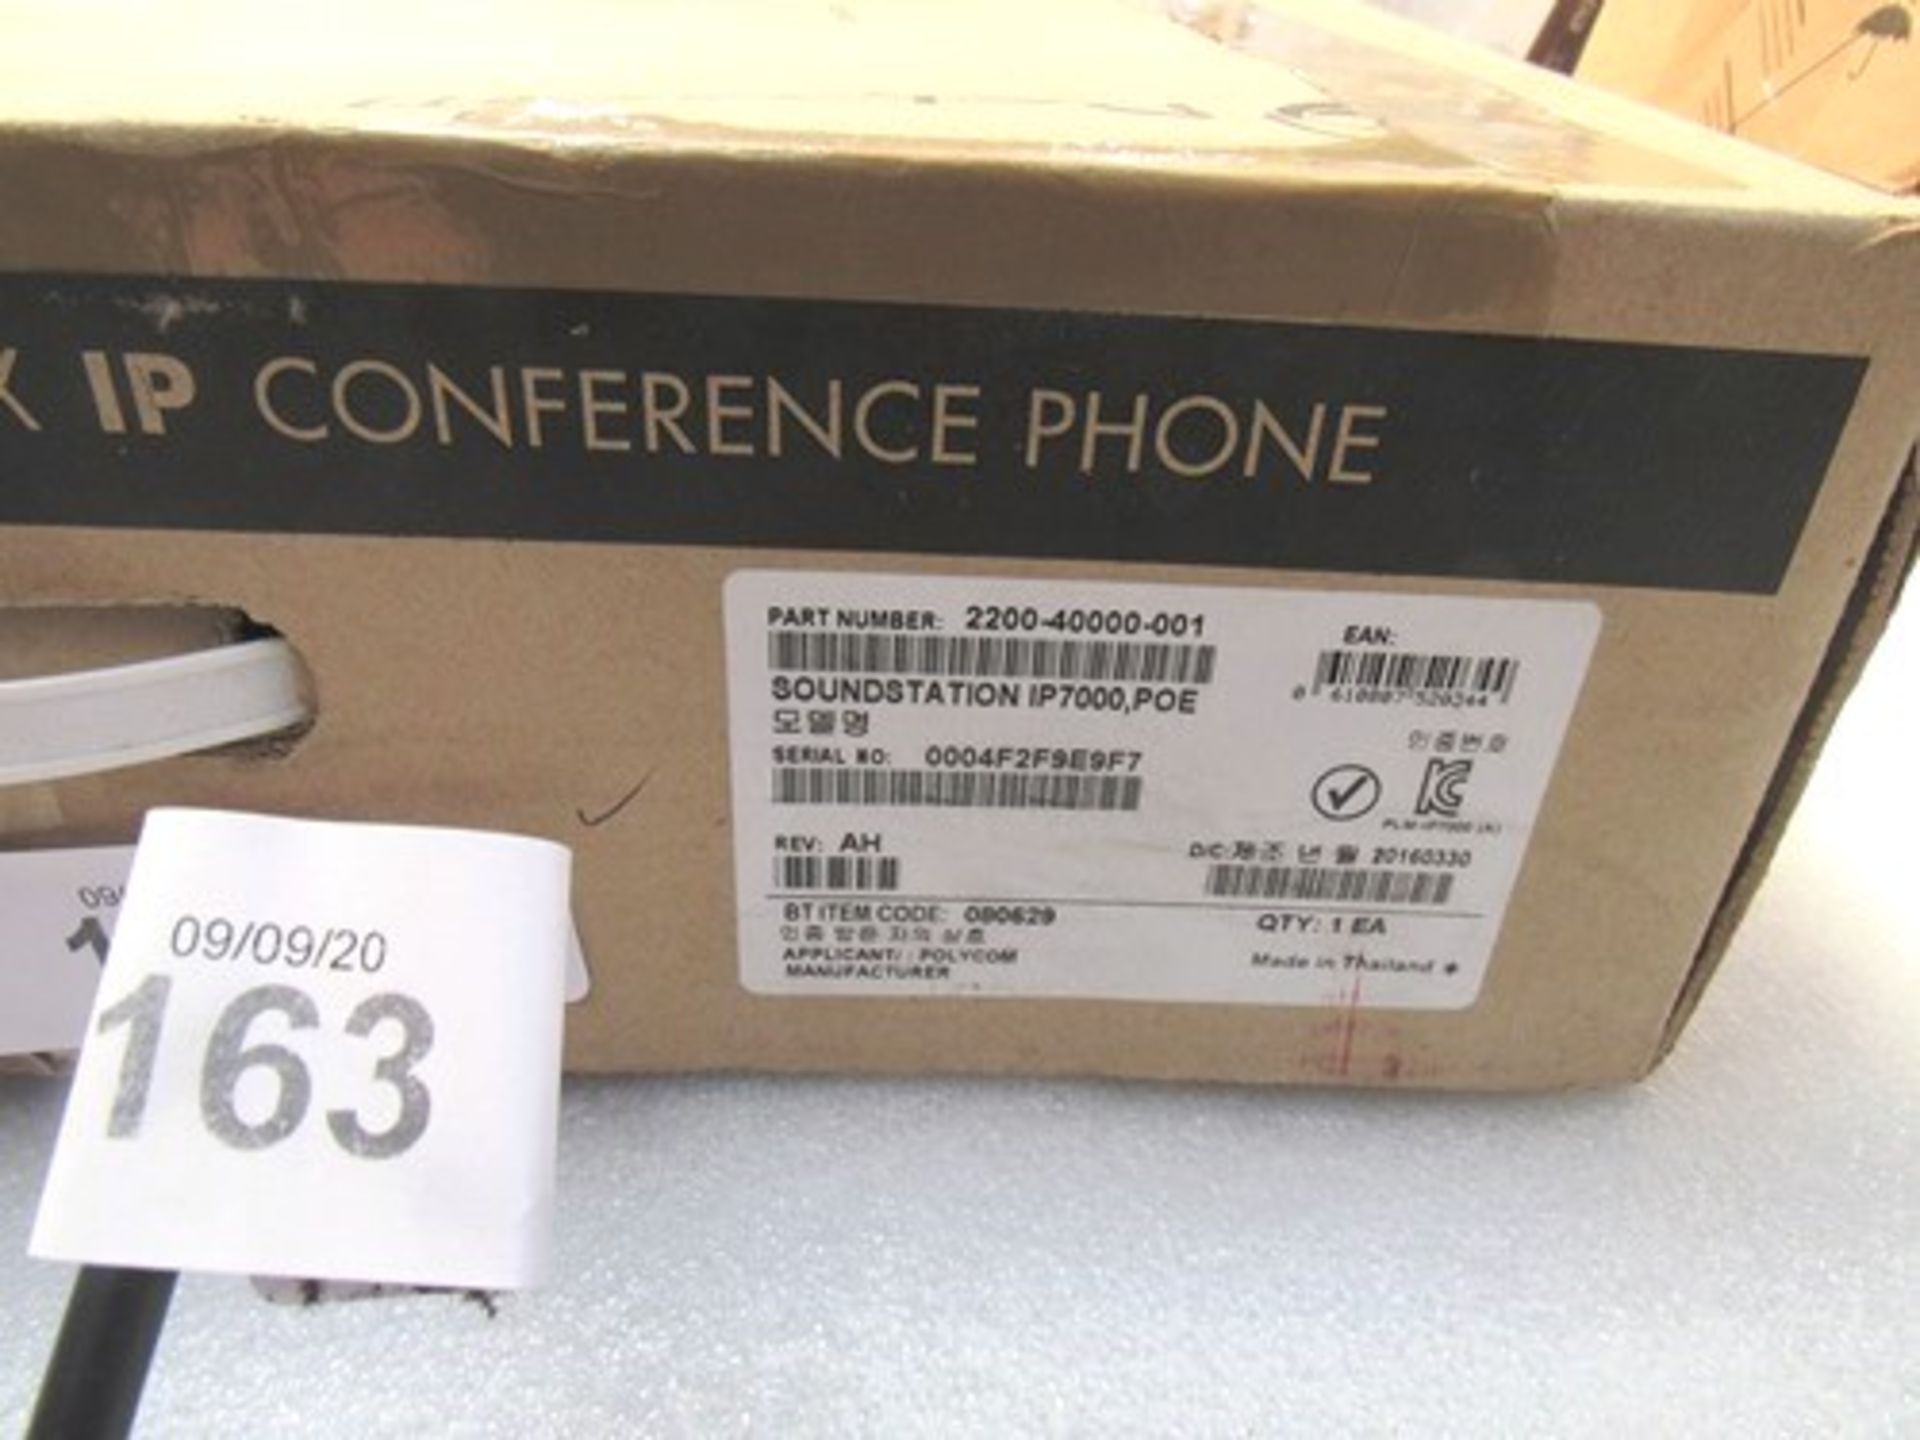 1 x Polycom SoundStation IP7000 POE conference phone, P.N. 2200-4000-001 - New in box, box open ( - Image 2 of 4